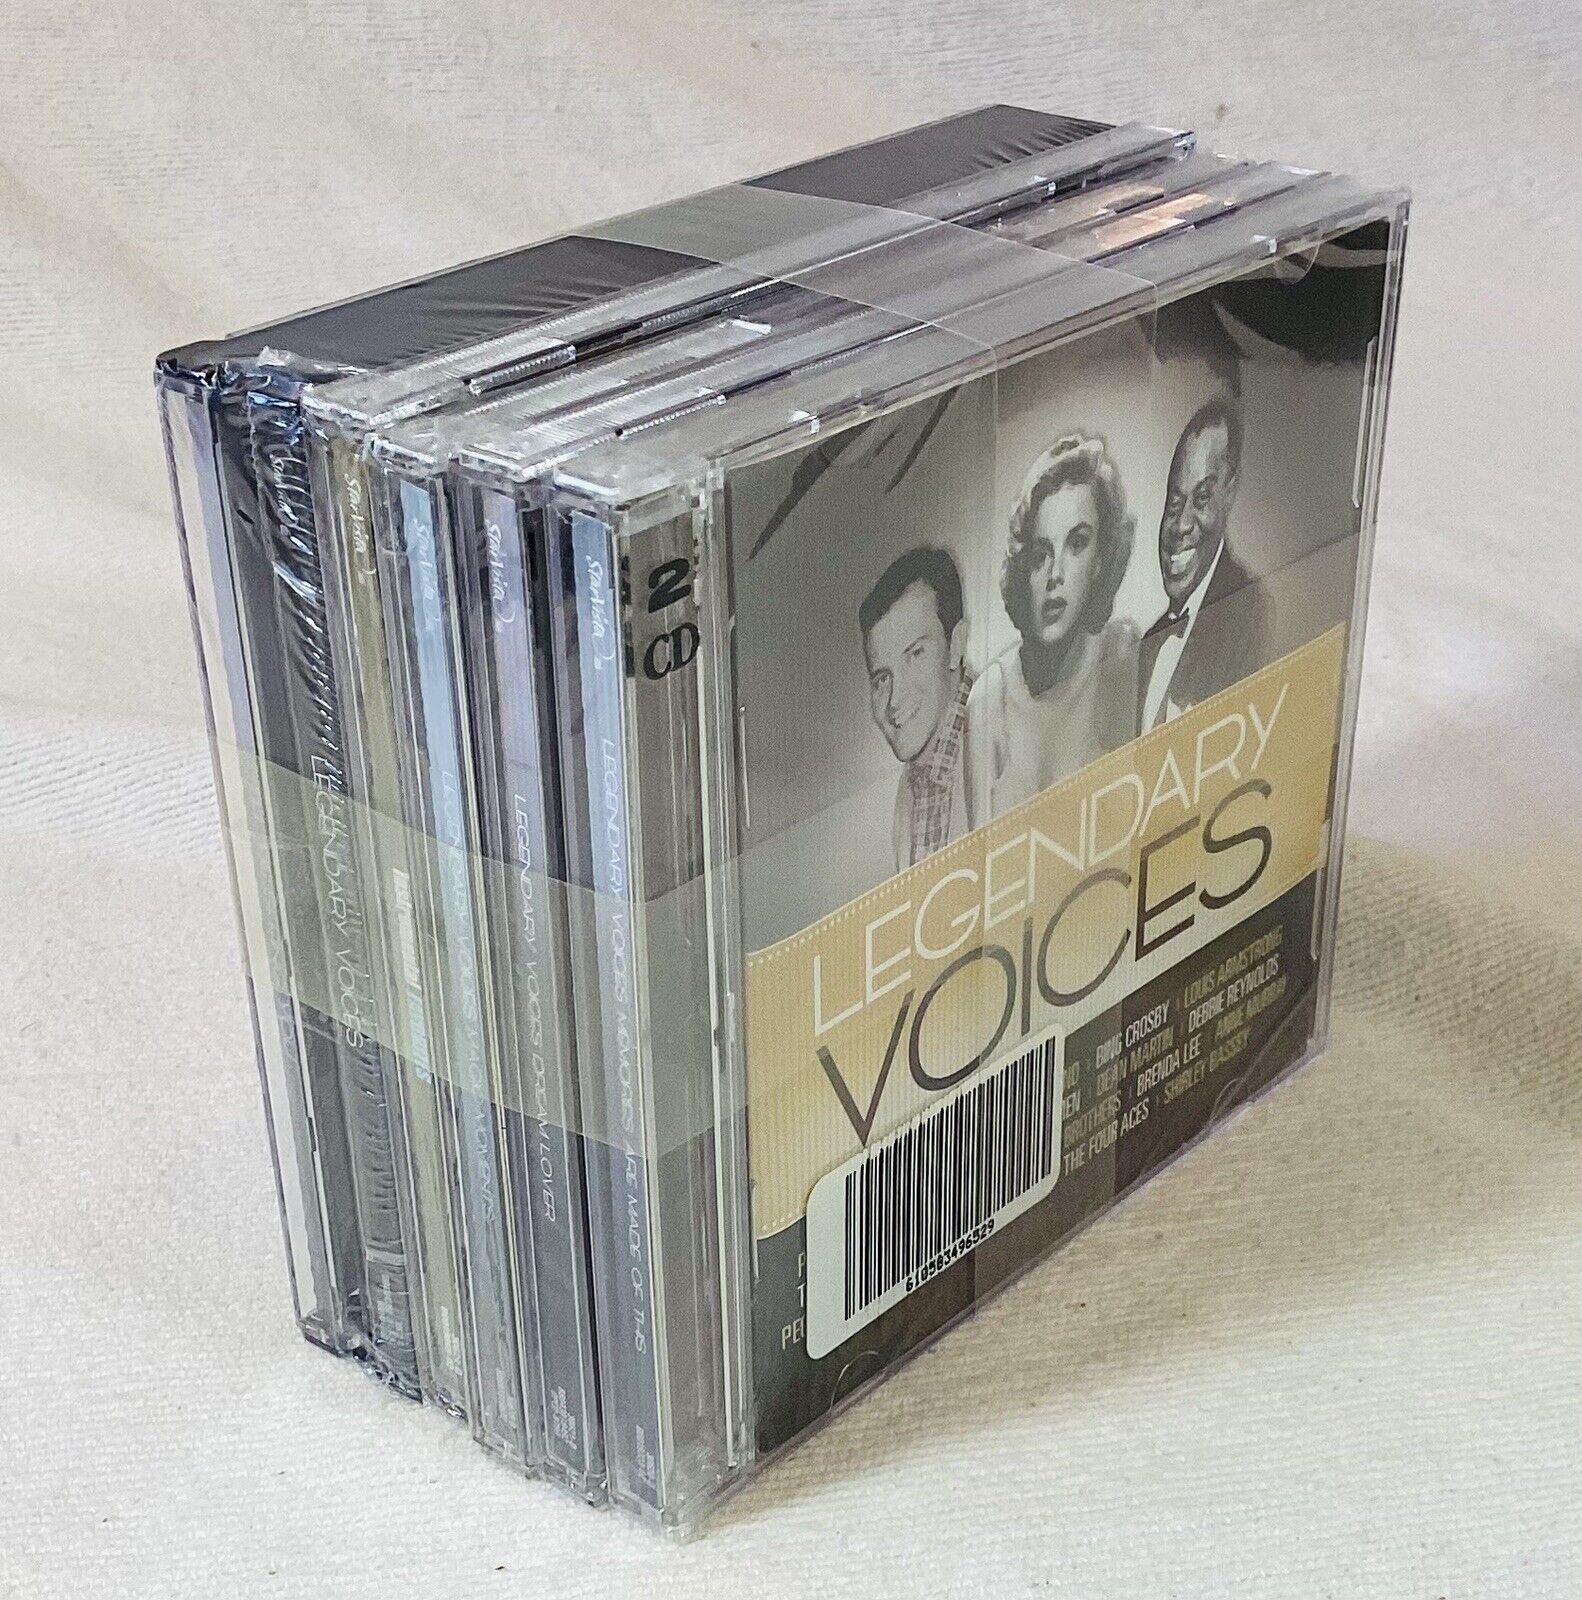 Legendary Voices 10 CD Set, from Star Vista/Time Life, All New & Sealed